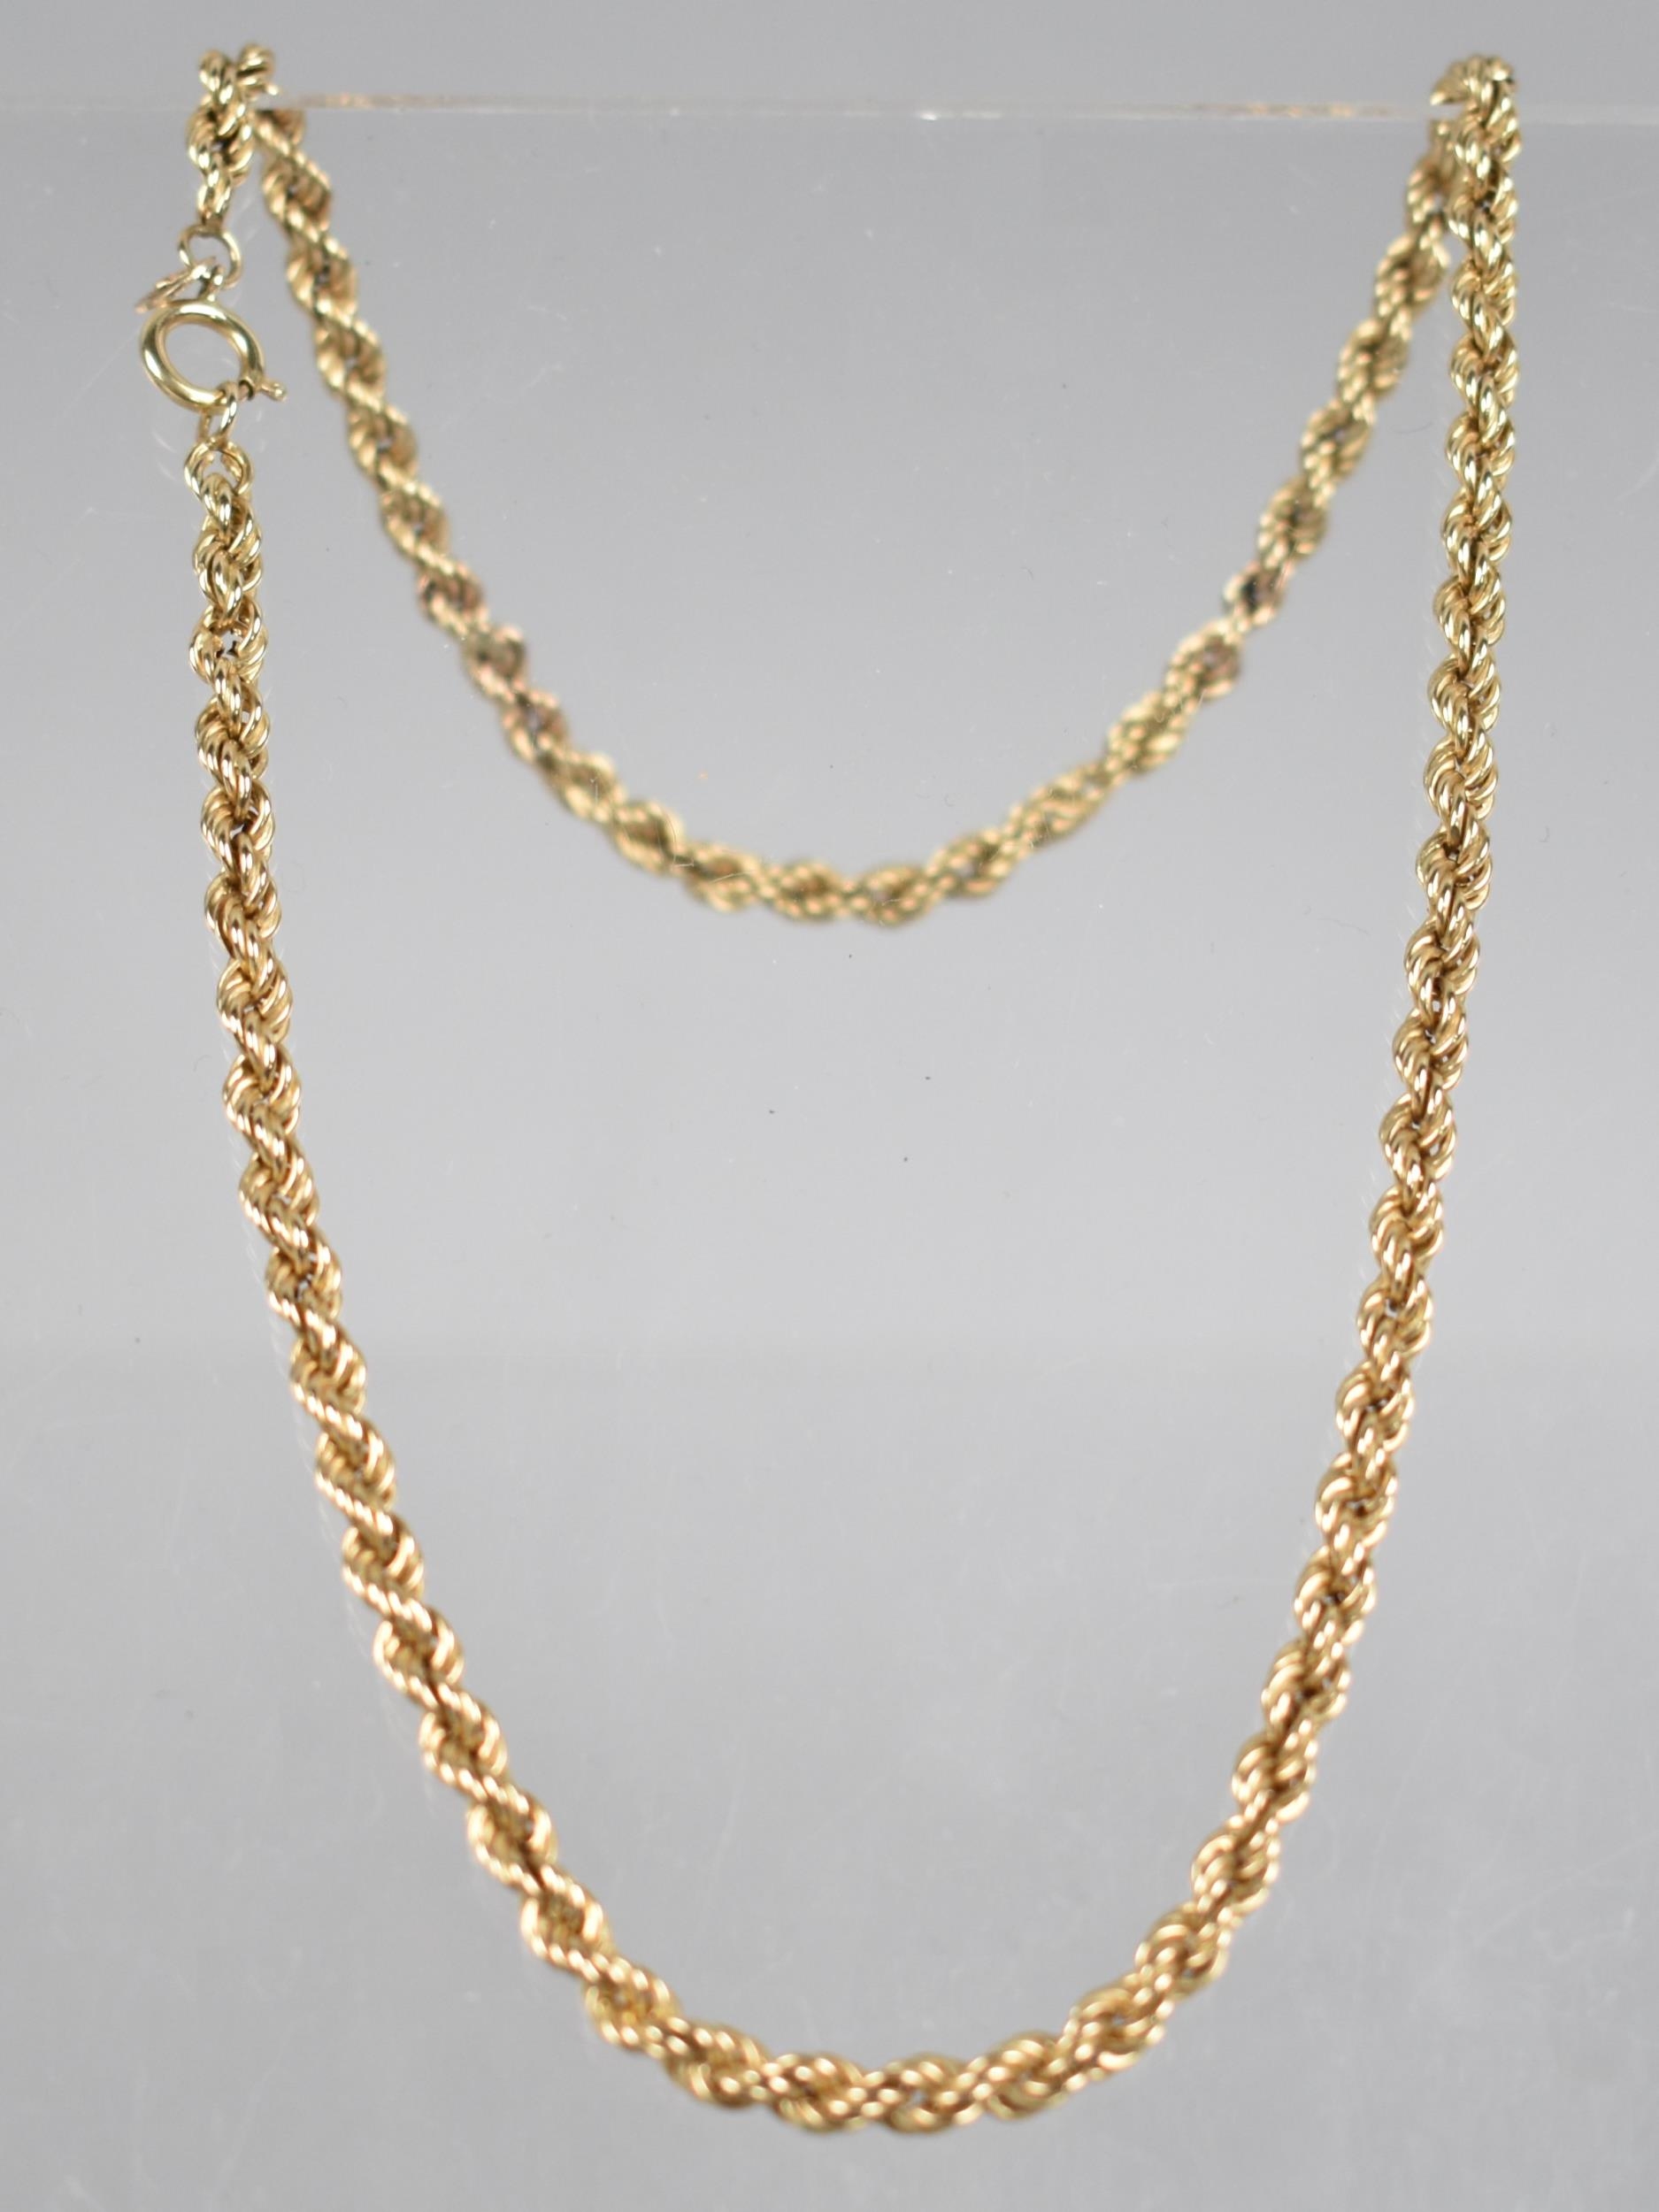 A 9ct Gold Rope Twist Necklace, 39cms Long, Stamped 9ct to Spring Barrel Clasp, 4.8gms - Image 2 of 3